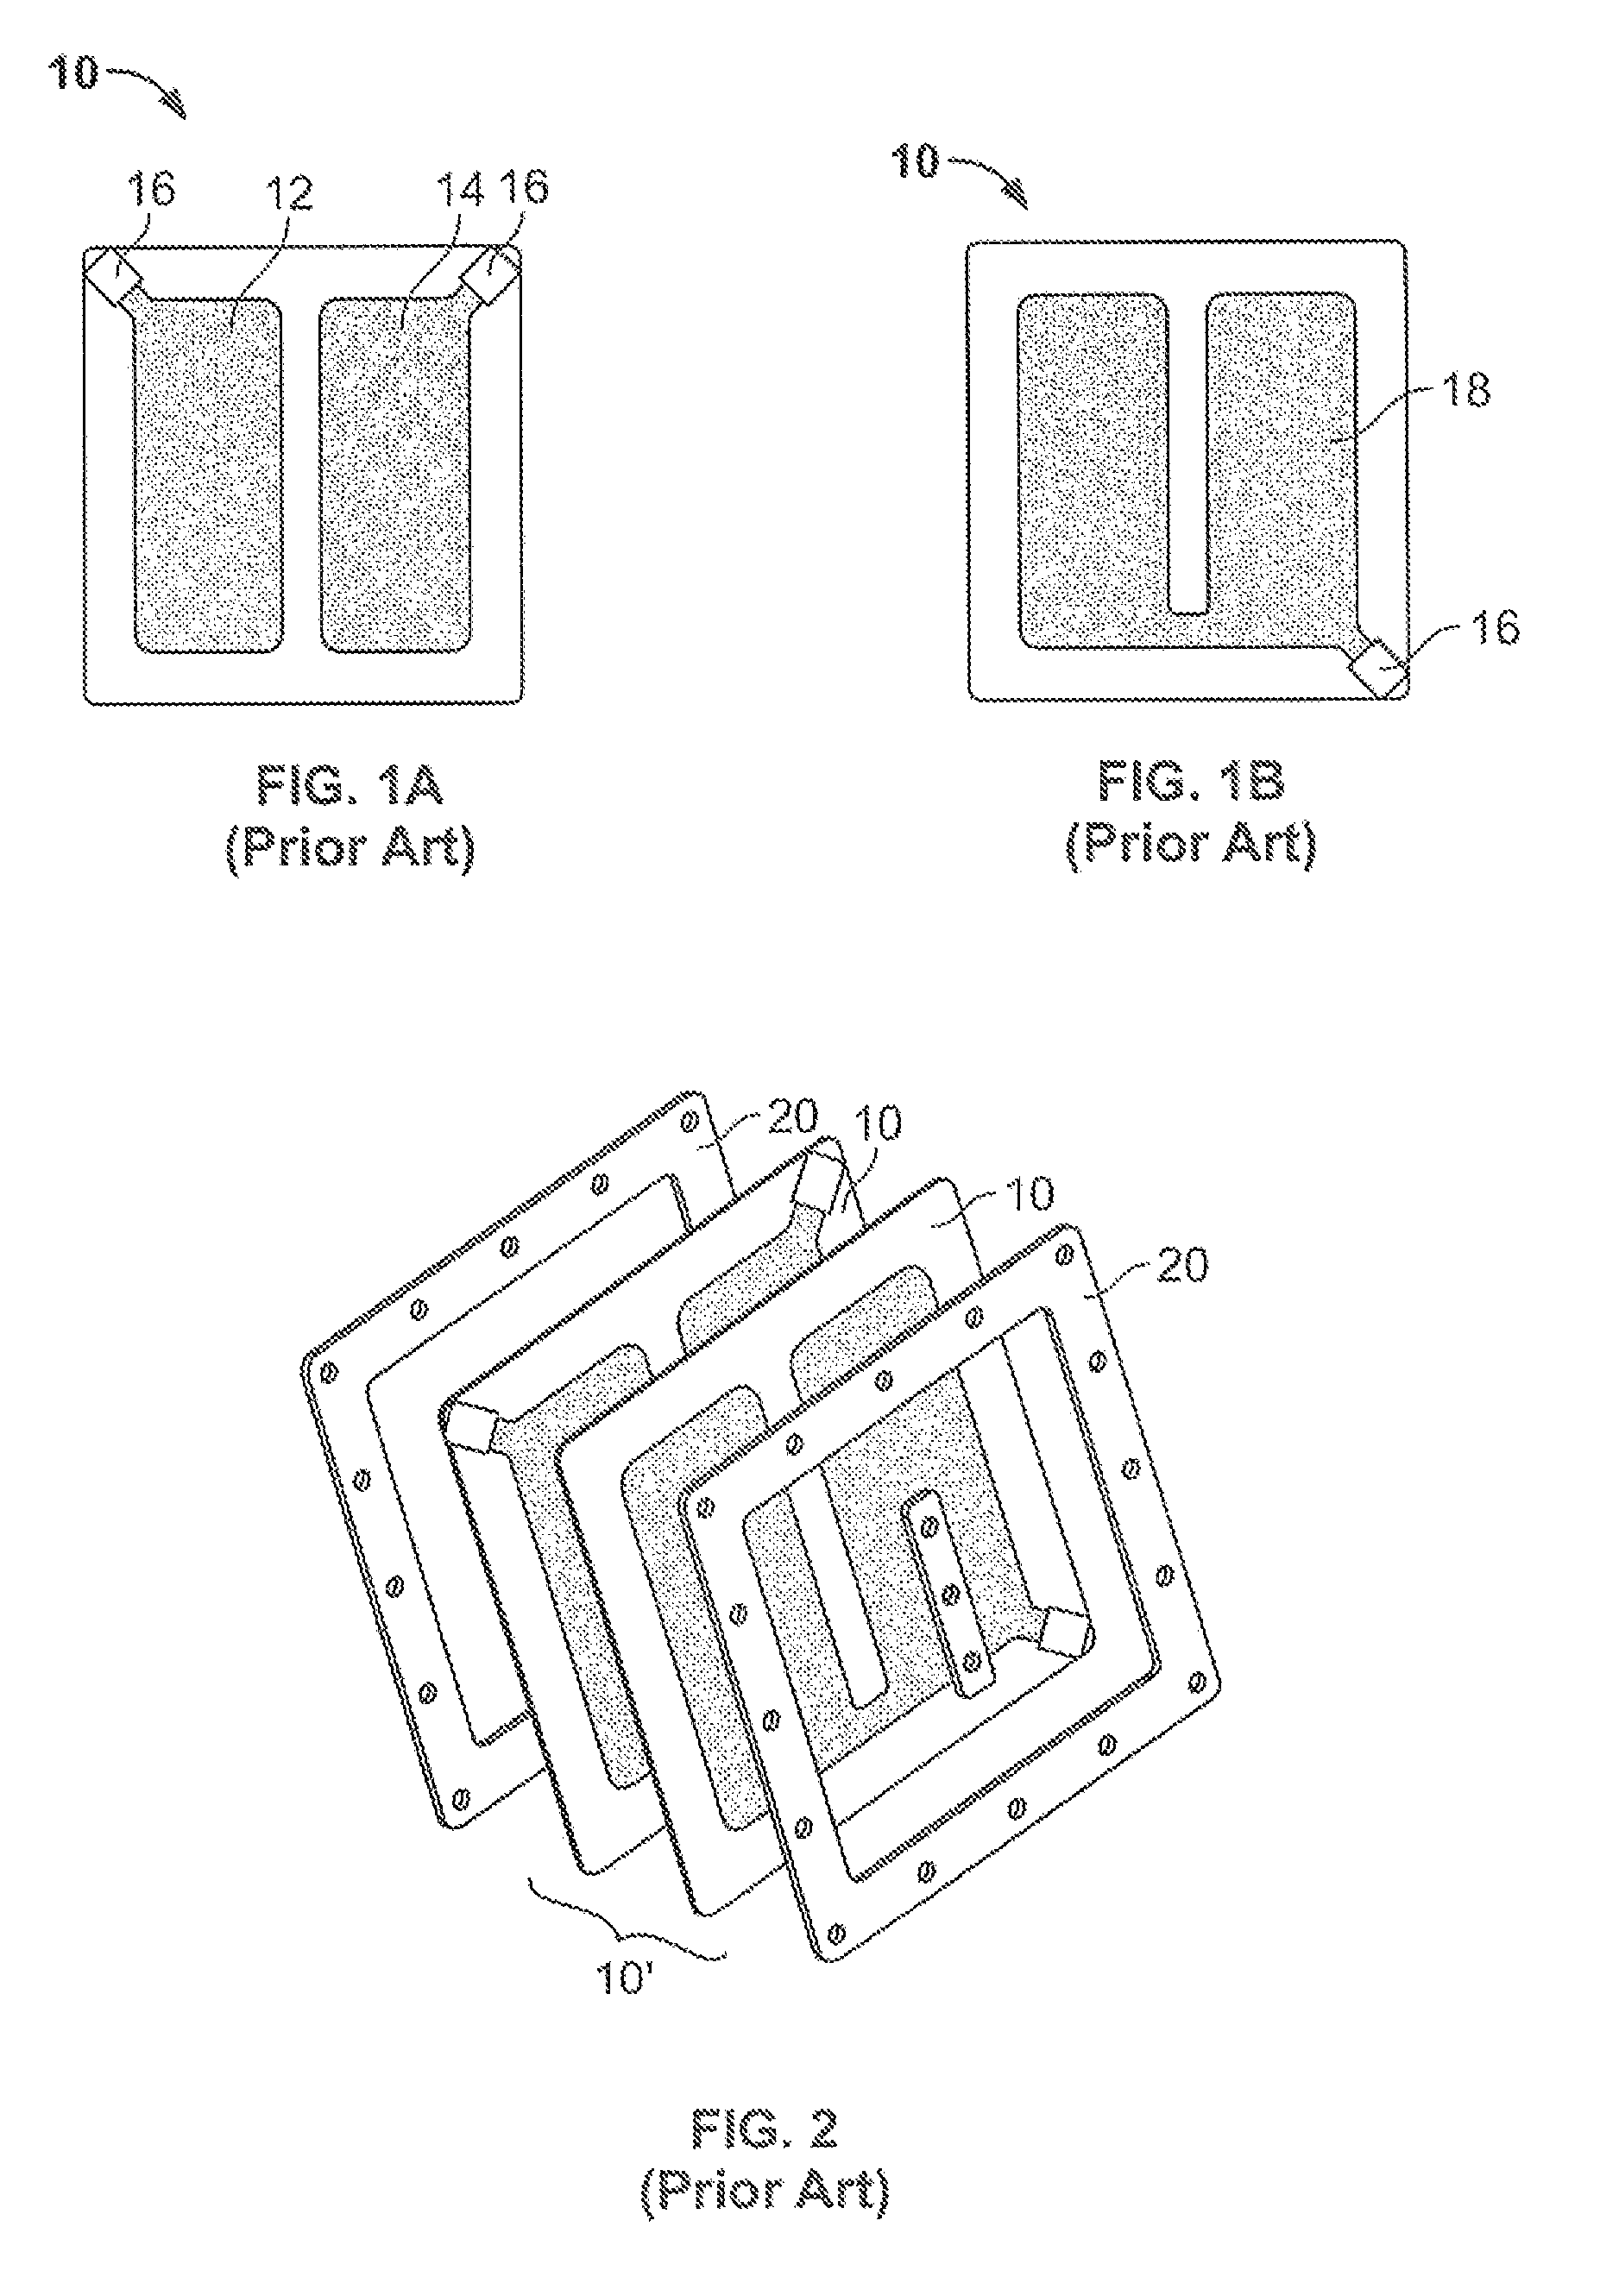 Three-dimensional electroactive polymer actuated devices